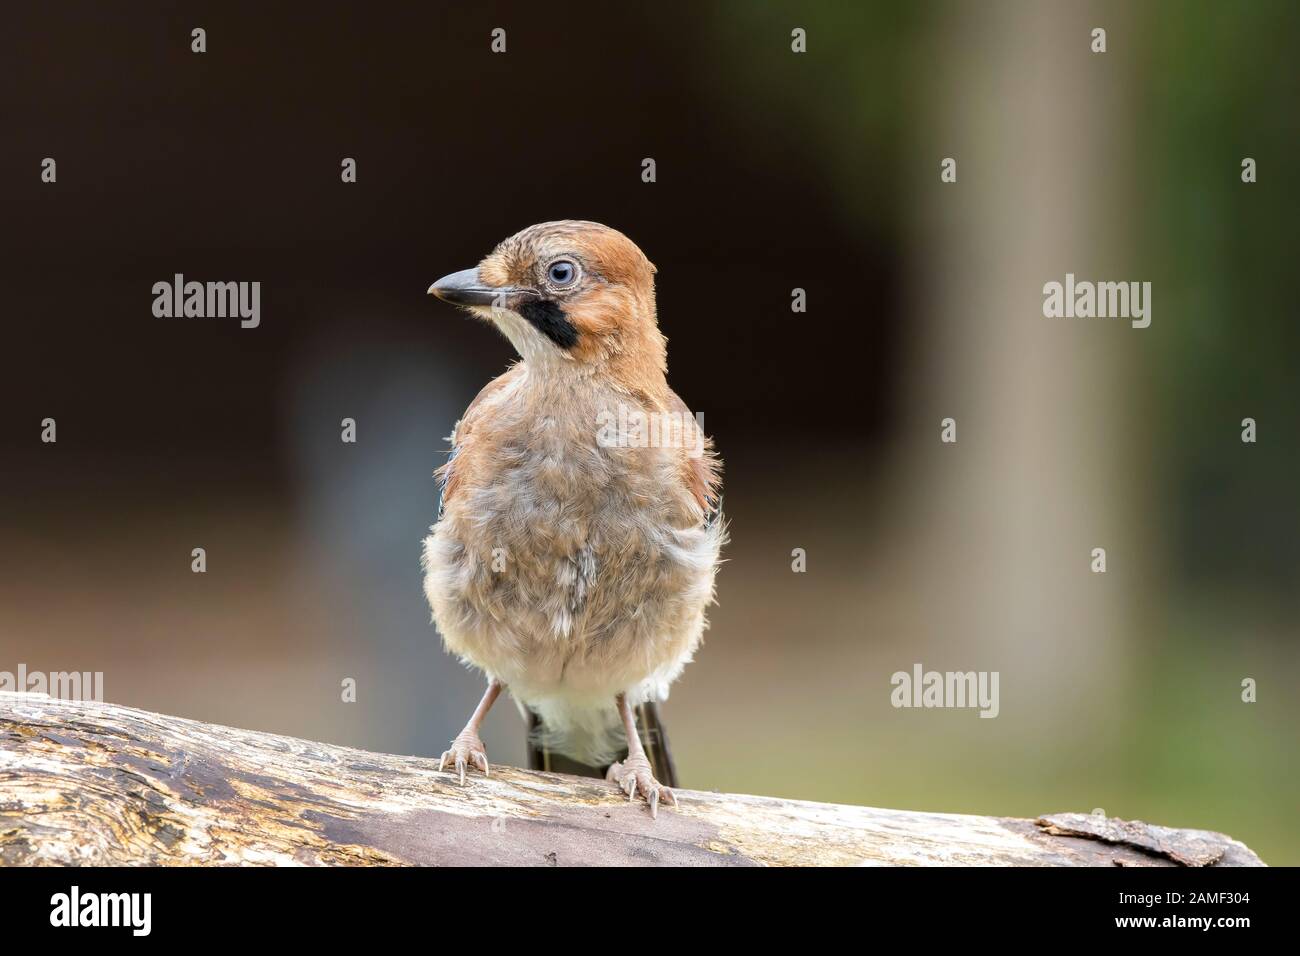 Detailed, front view close up of wild, juvenile UK jay bird (Garrulus glandarius) with downy feathers, isolated outdoors perched on log. Stock Photo